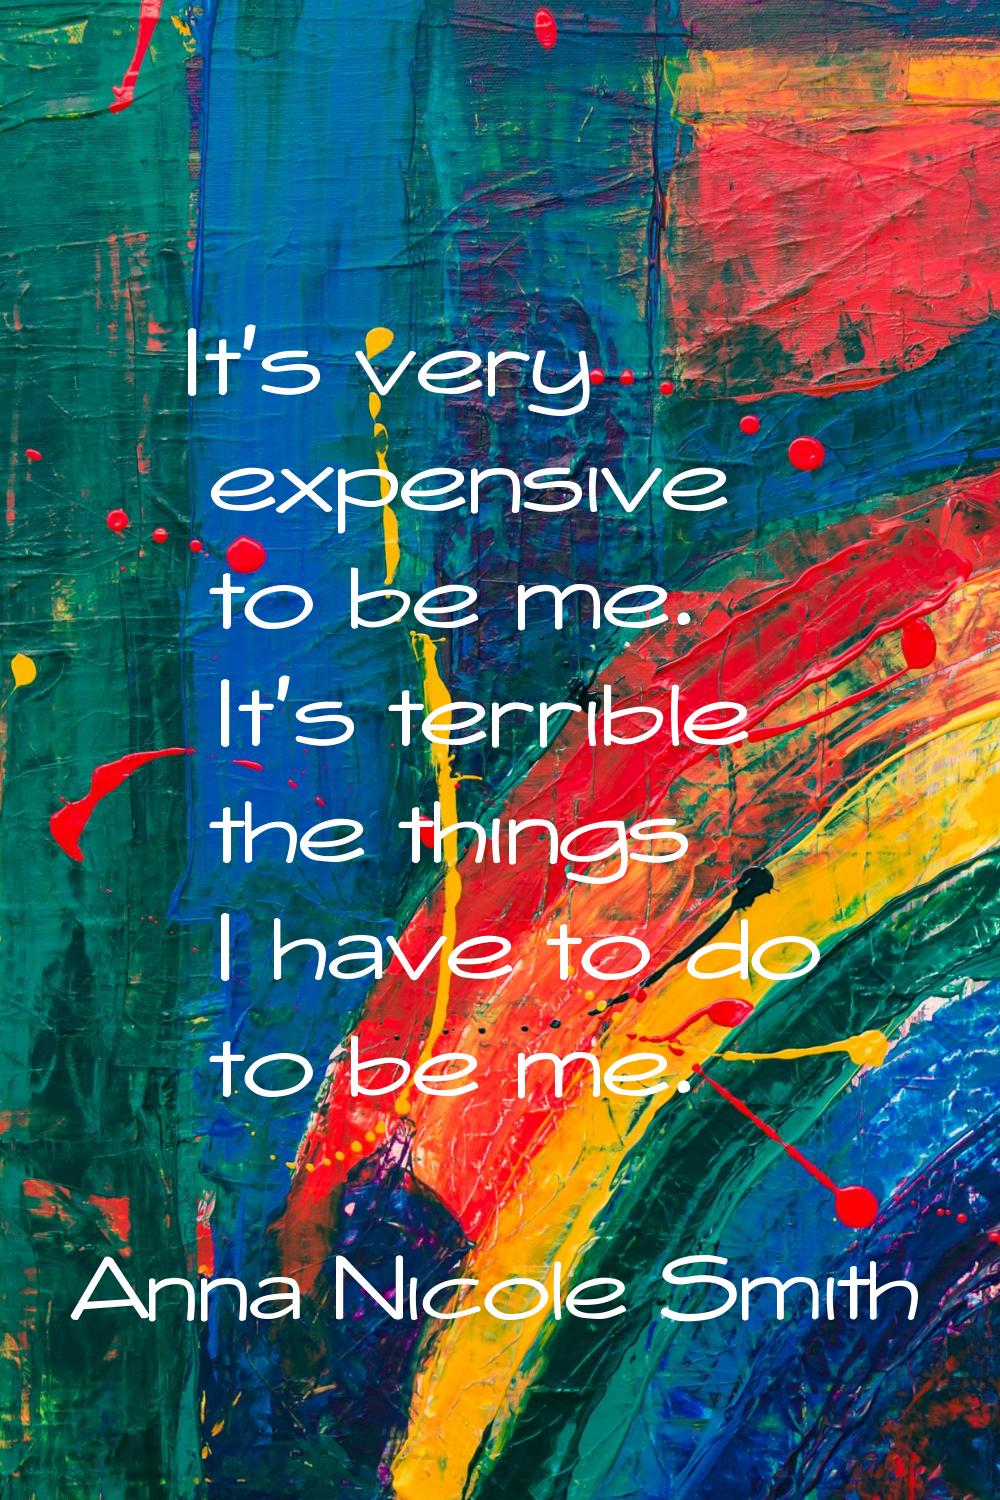 It's very expensive to be me. It's terrible the things I have to do to be me.